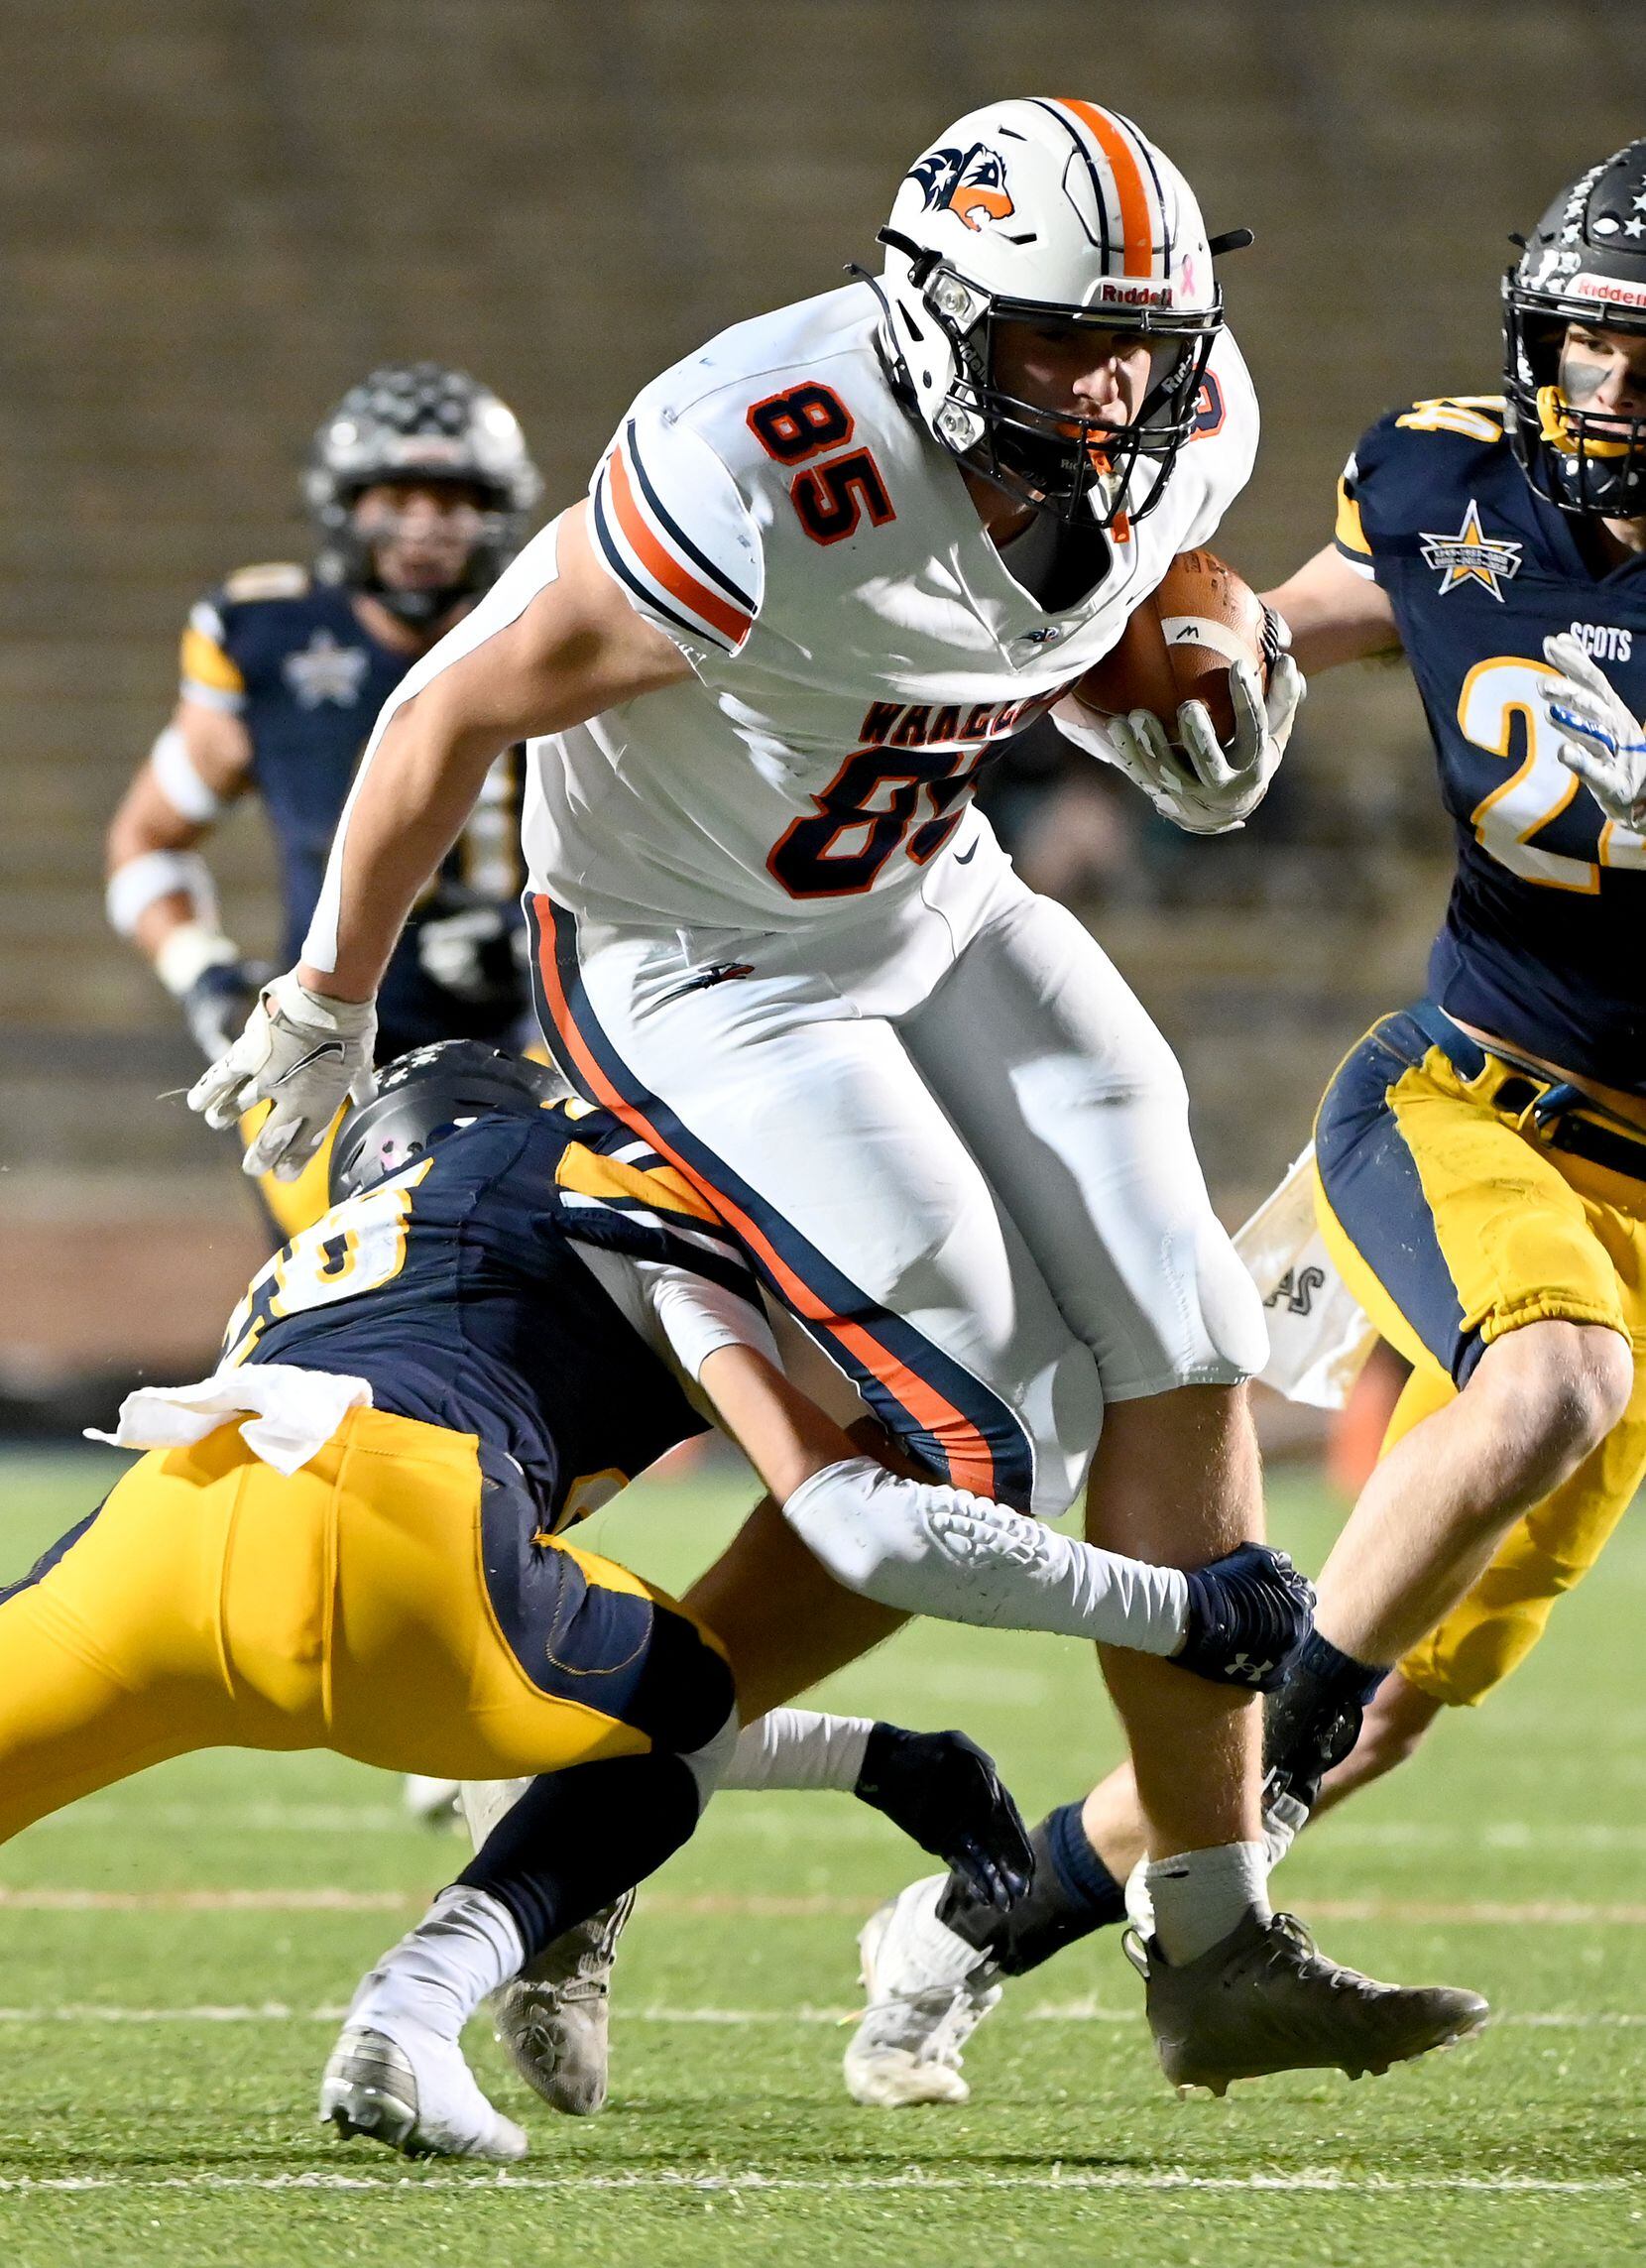 Wakeland's Tripp Riordan (85) is tackled by Highland Park's J.T. Withers (26) attempt by in...